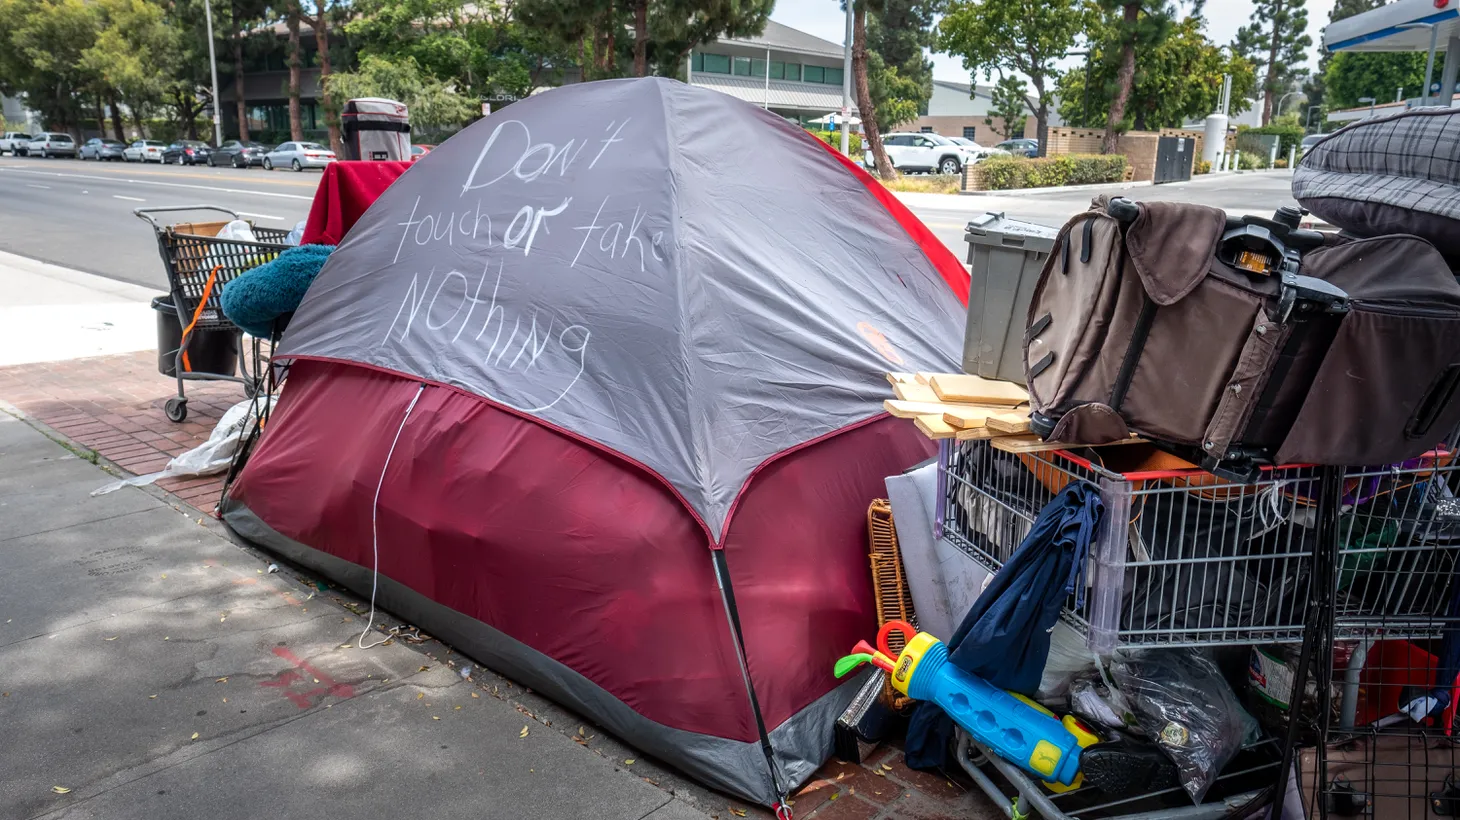 An unhoused Angeleno wrote on their tent, “Don’t touch or take nothing,” in Culver City, CA, July 20, 2022. “People in the city and the county have essentially over these years worked to address and reduce the problem, but not with the fortitude of ‘this has got to end,’” Karen Bass says of the homelessness crisis.